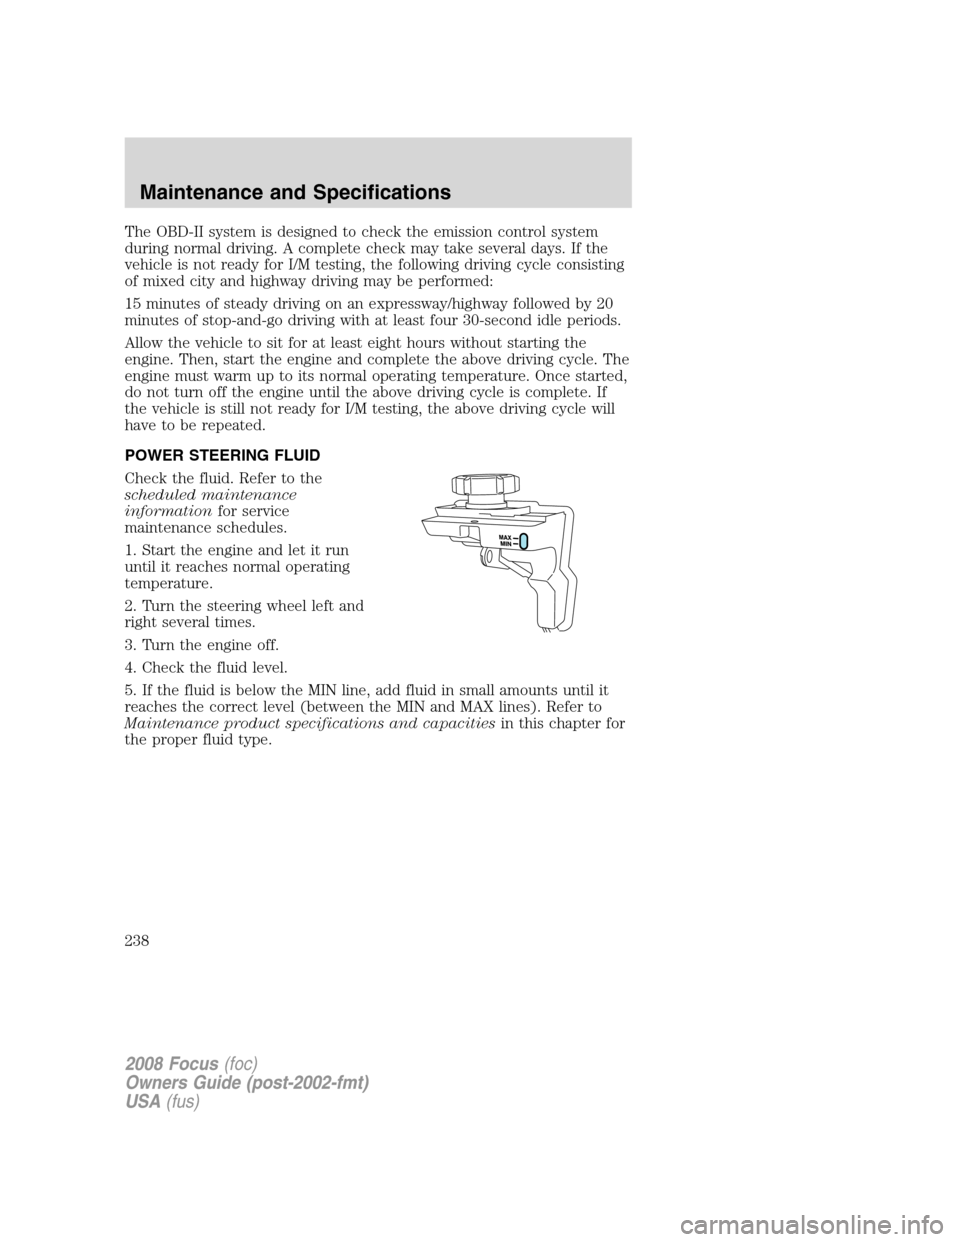 FORD FOCUS 2008 2.G Service Manual The OBD-II system is designed to check the emission control system
during normal driving. A complete check may take several days. If the
vehicle is not ready for I/M testing, the following driving cyc